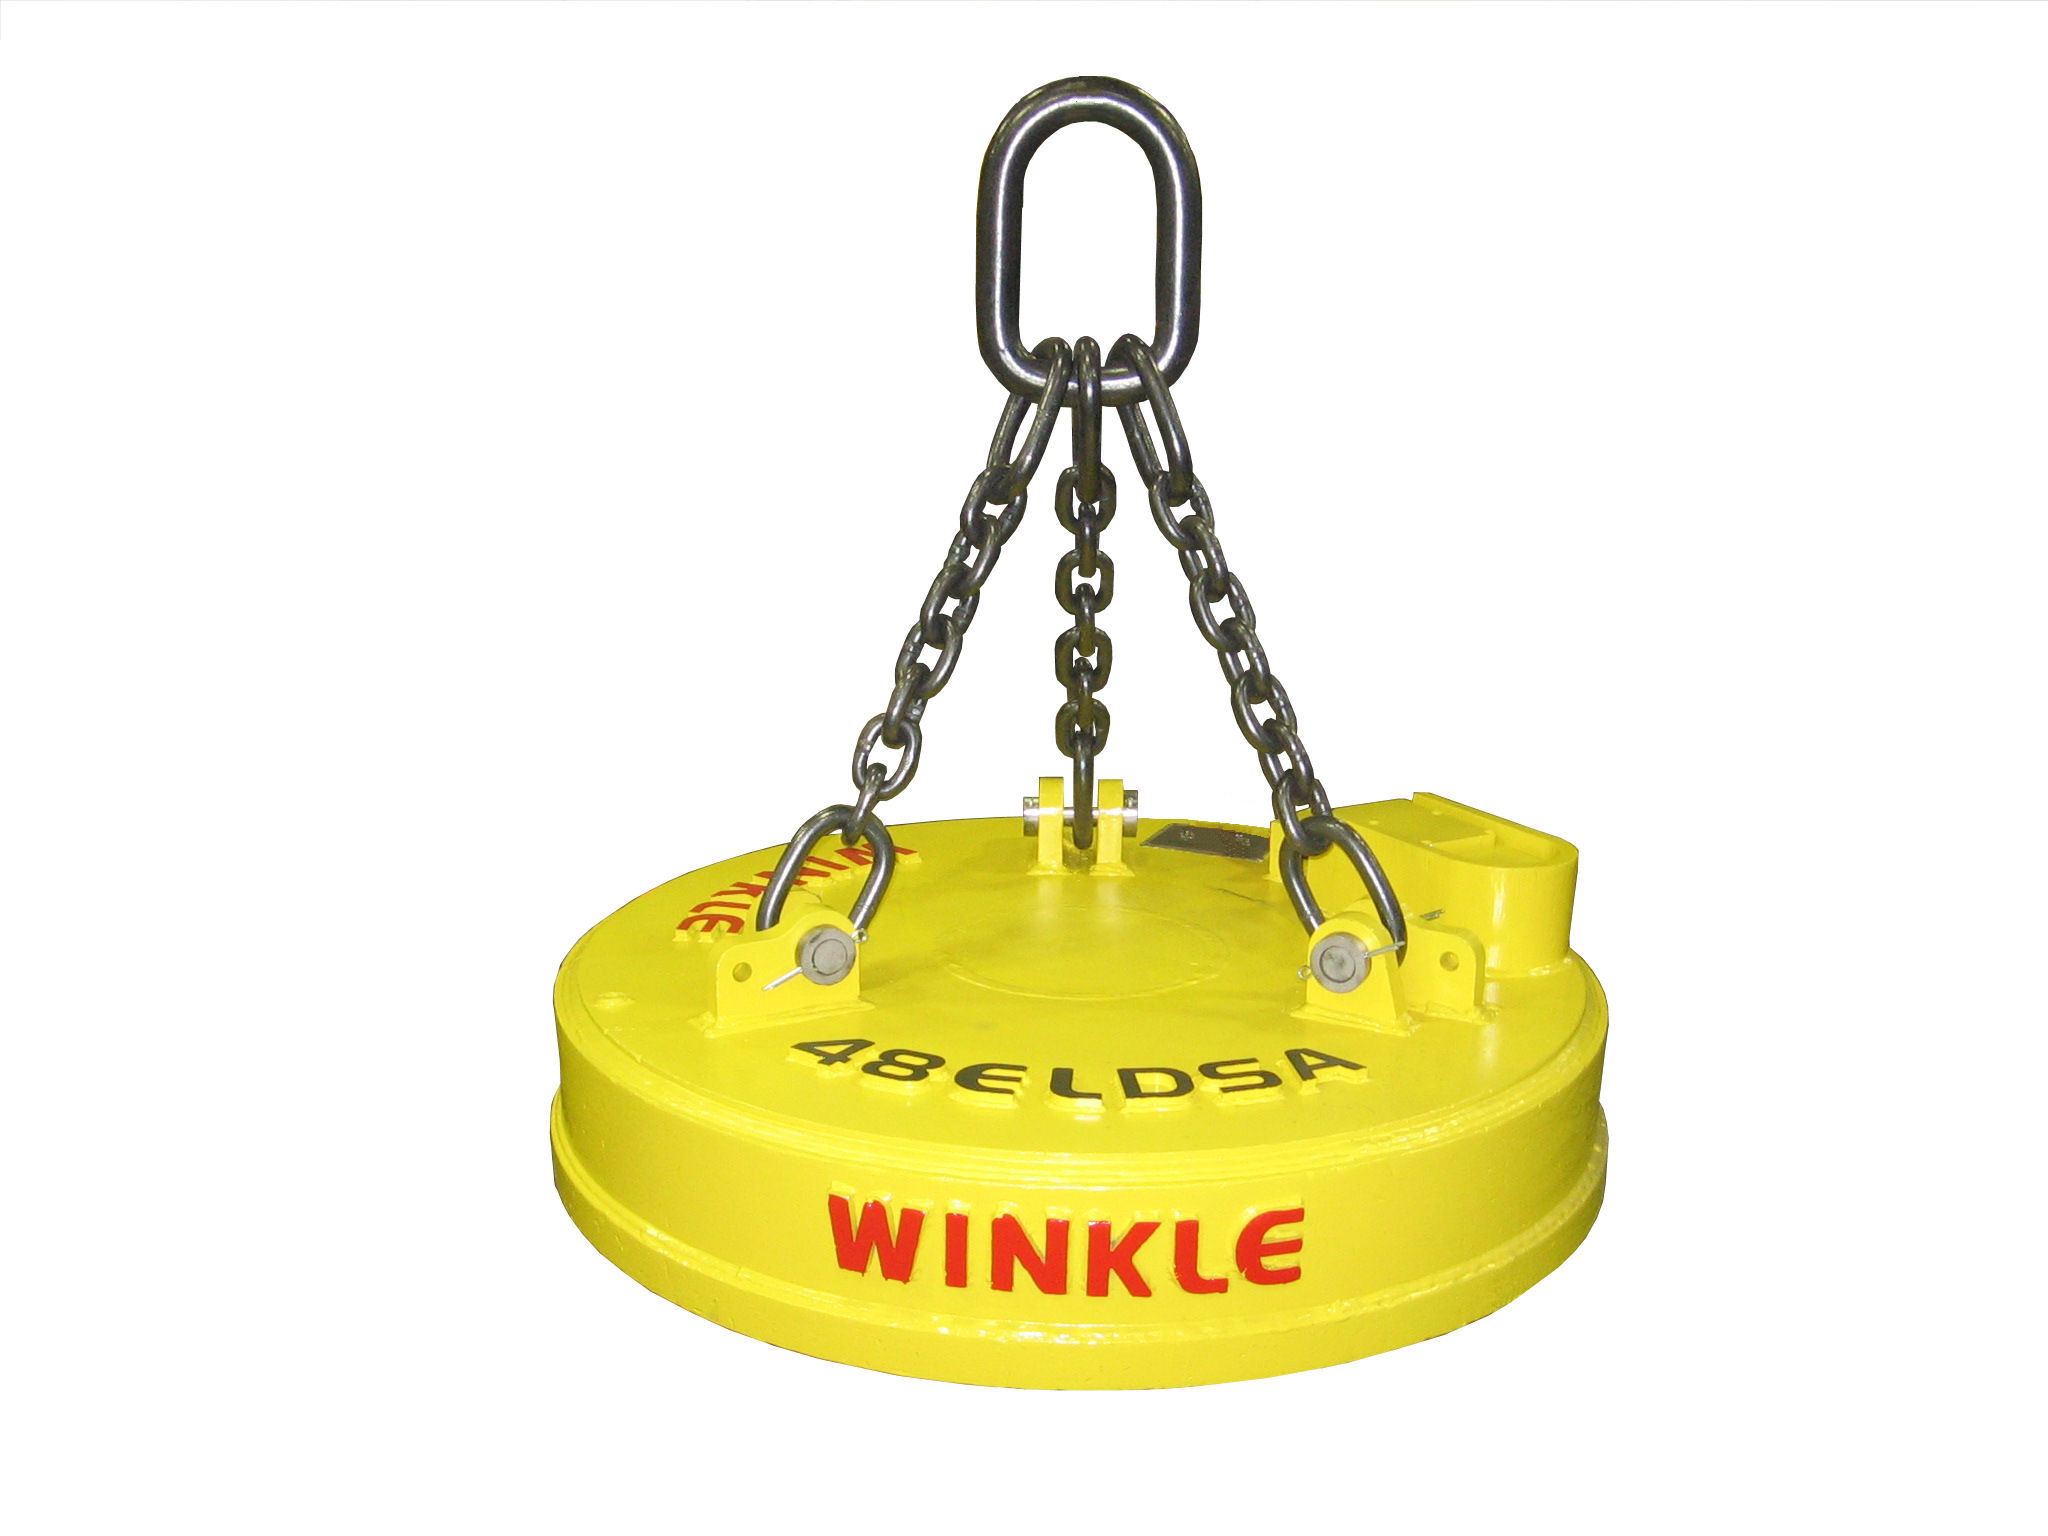 New Optimag L-Series Lifting Magnets from Winkle Maximize Load Capacity for Scrap Handlers